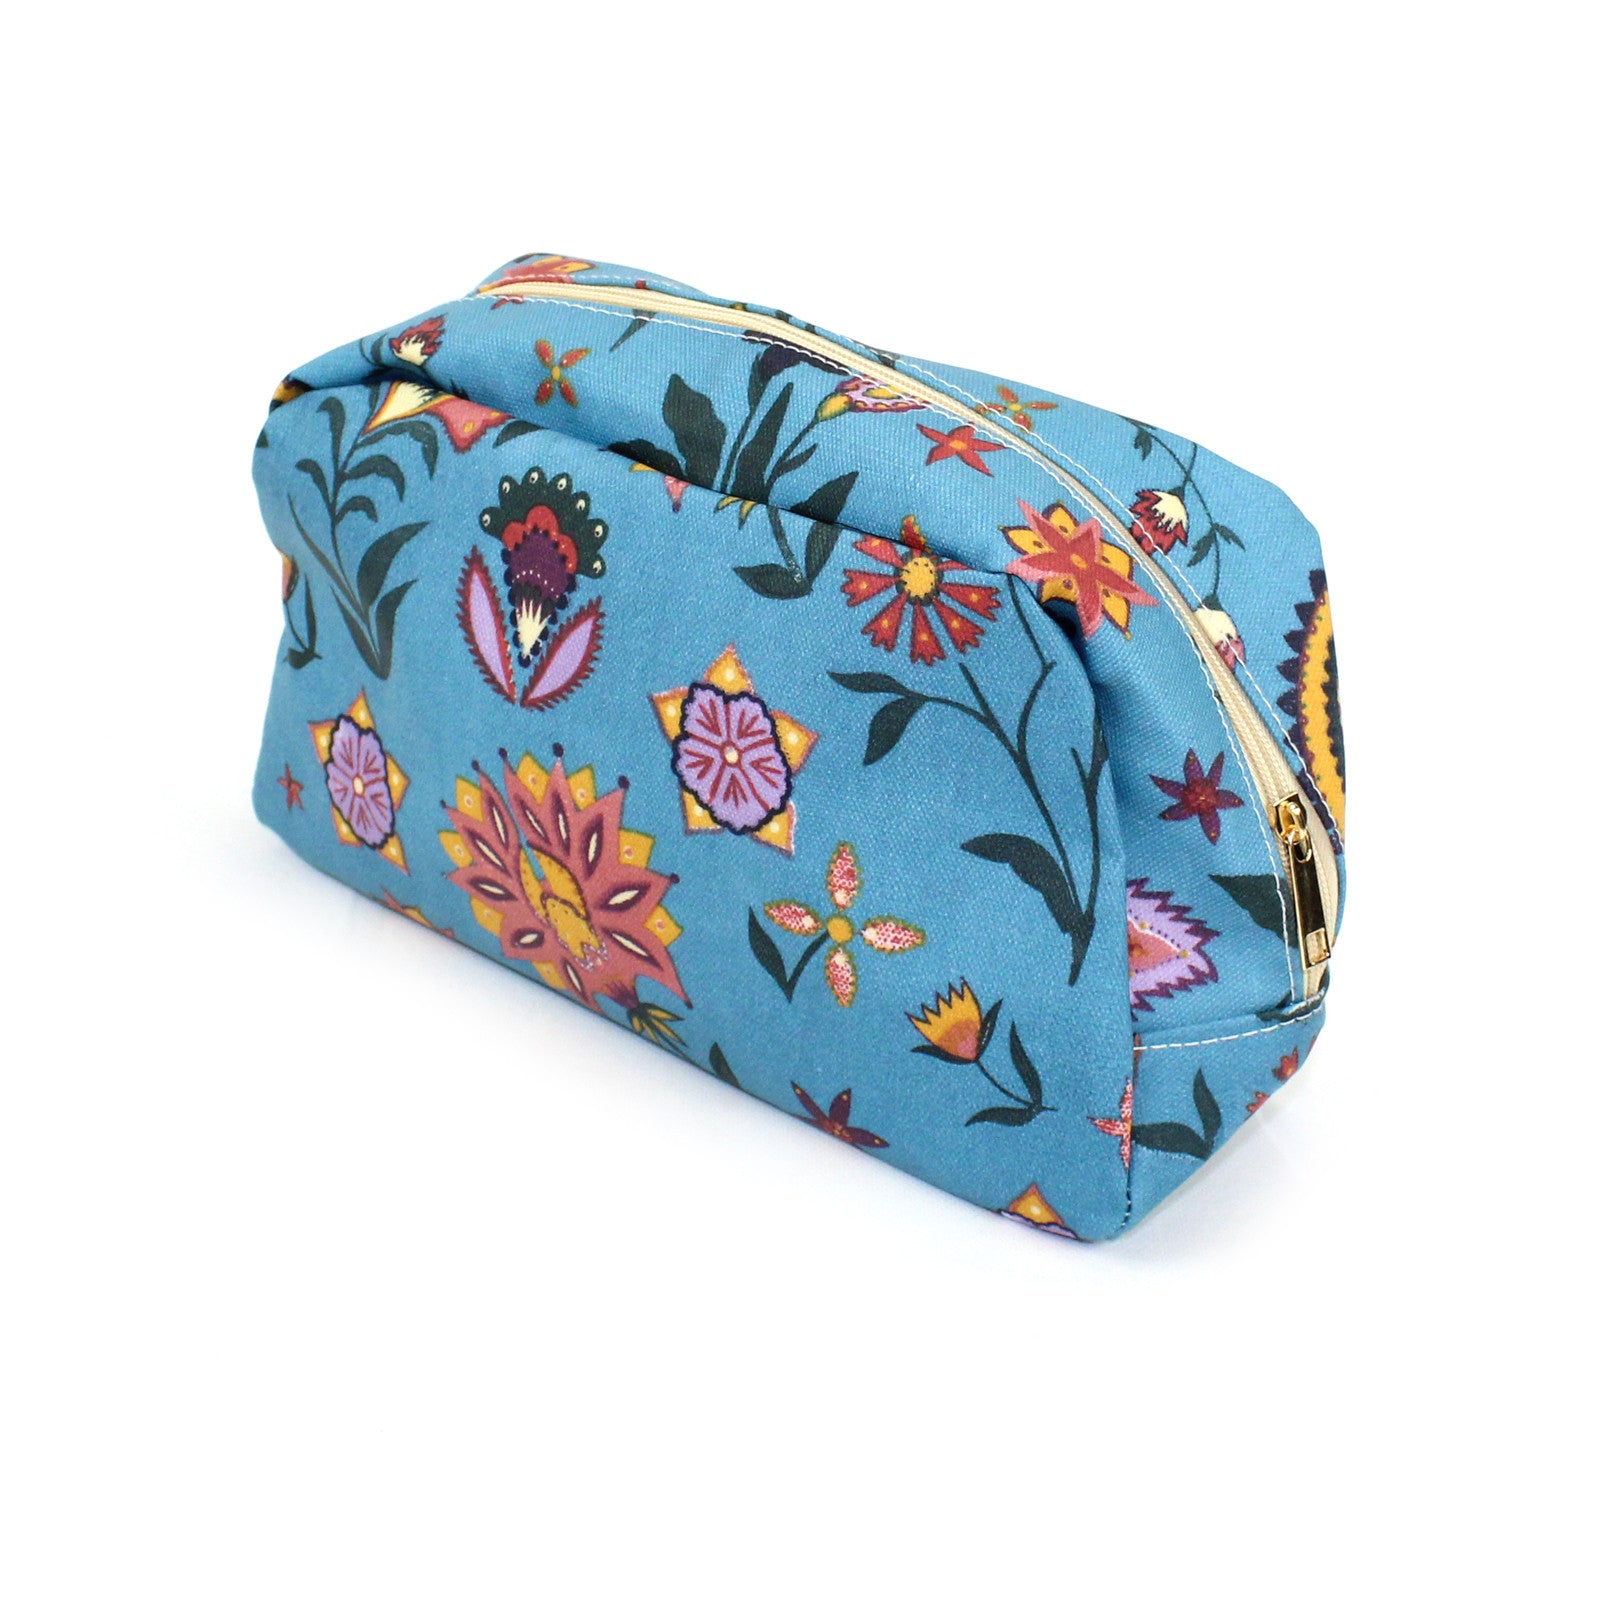 Large oil cloth make up / wash bag with a pretty paisley print with a boho vibe, on a solid blue background.